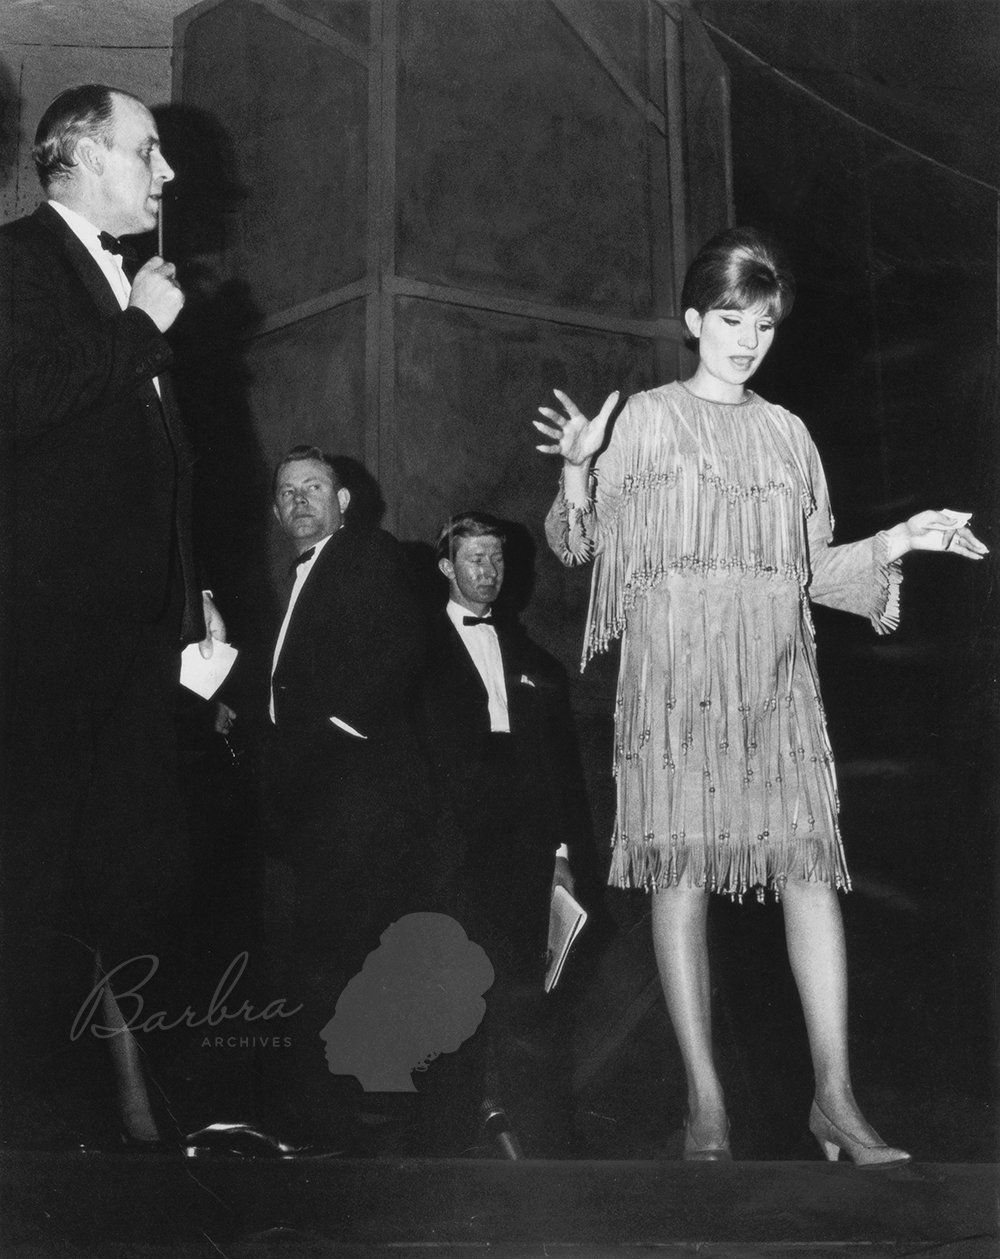 Barbra Streisand on stage at the Prince of Wales Theatre, London 